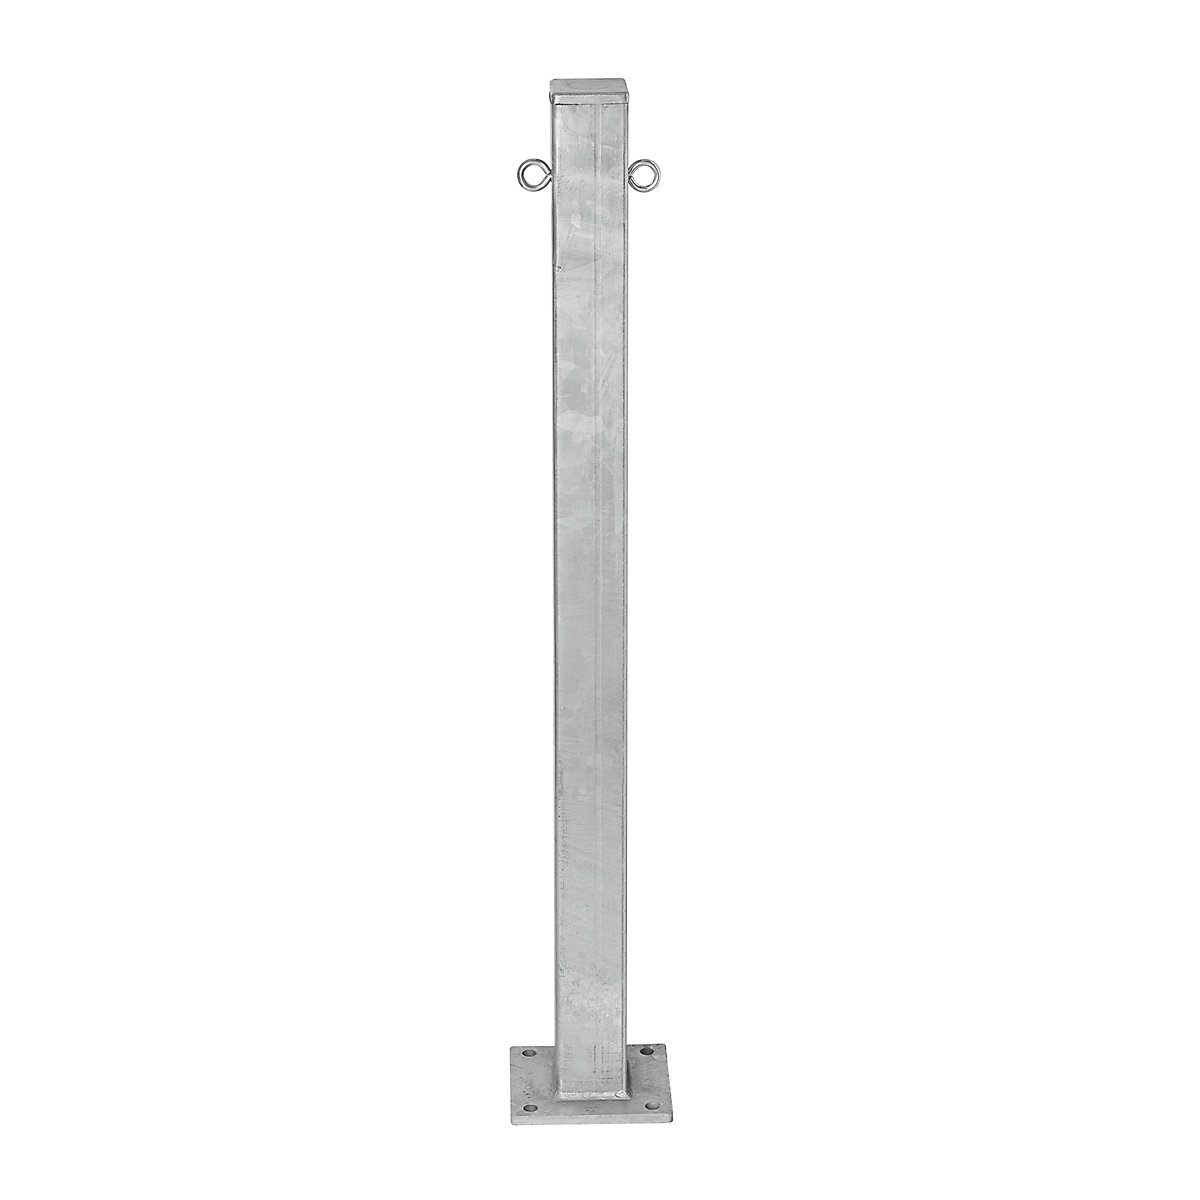 Barrier post made of steel, for bolting in place, 70 x 70 mm, hot dip galvanised, 2 chain eyelets-6